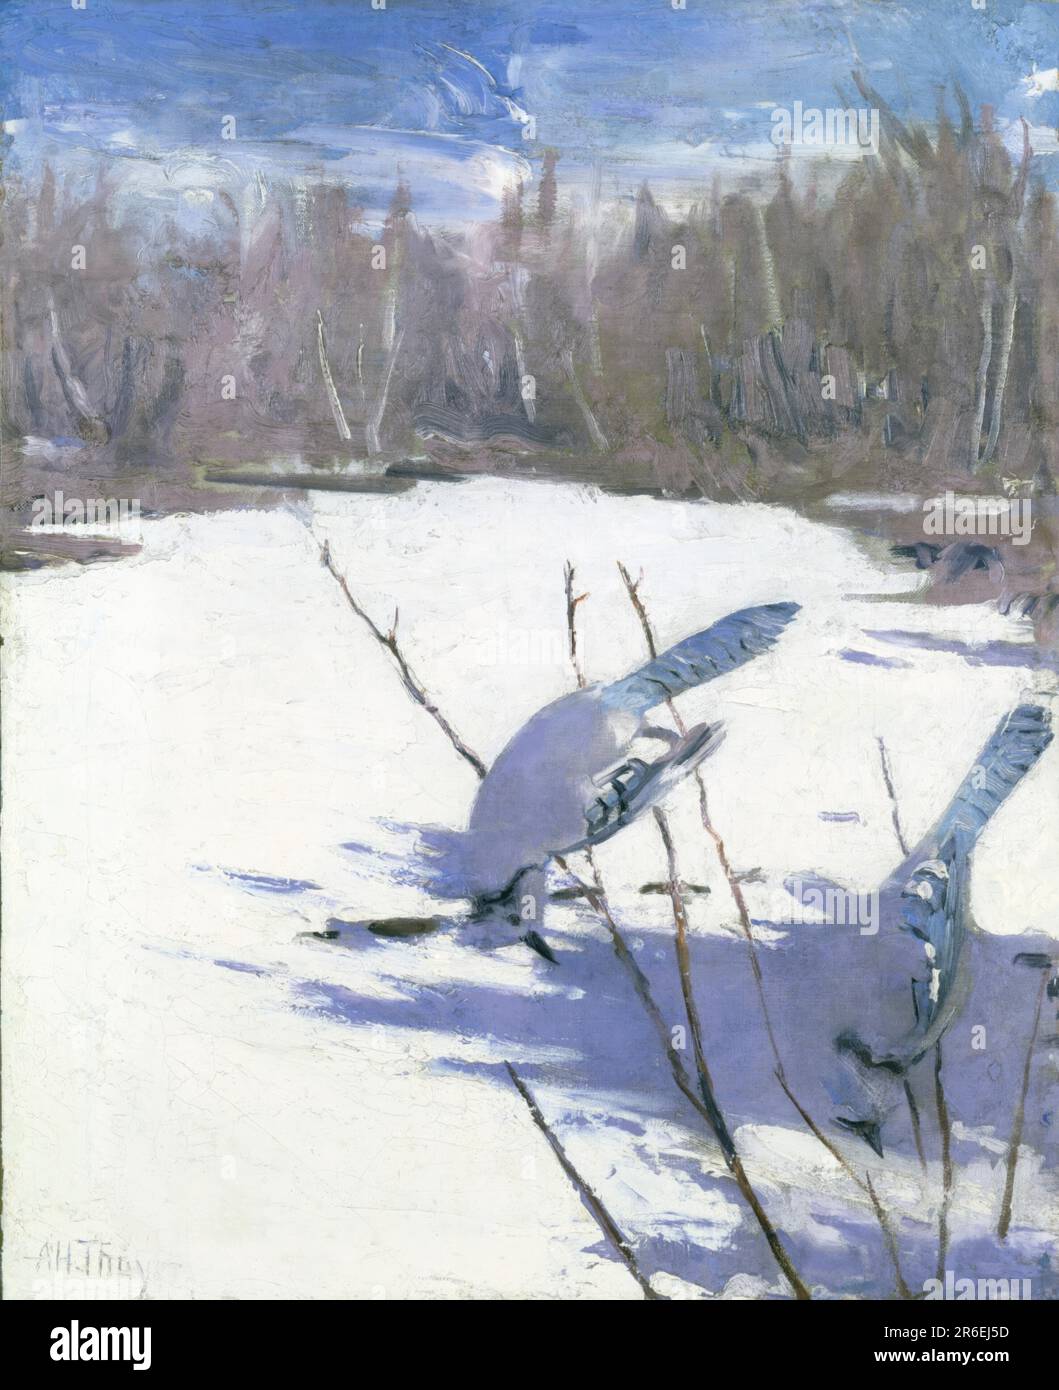 Blue Jays in Winter, study for book Concealing Coloration in the Animal Kingdom. oil on canvas. Date: ca. 1905-1909. Museum: Smithsonian American Art Museum. Stock Photo